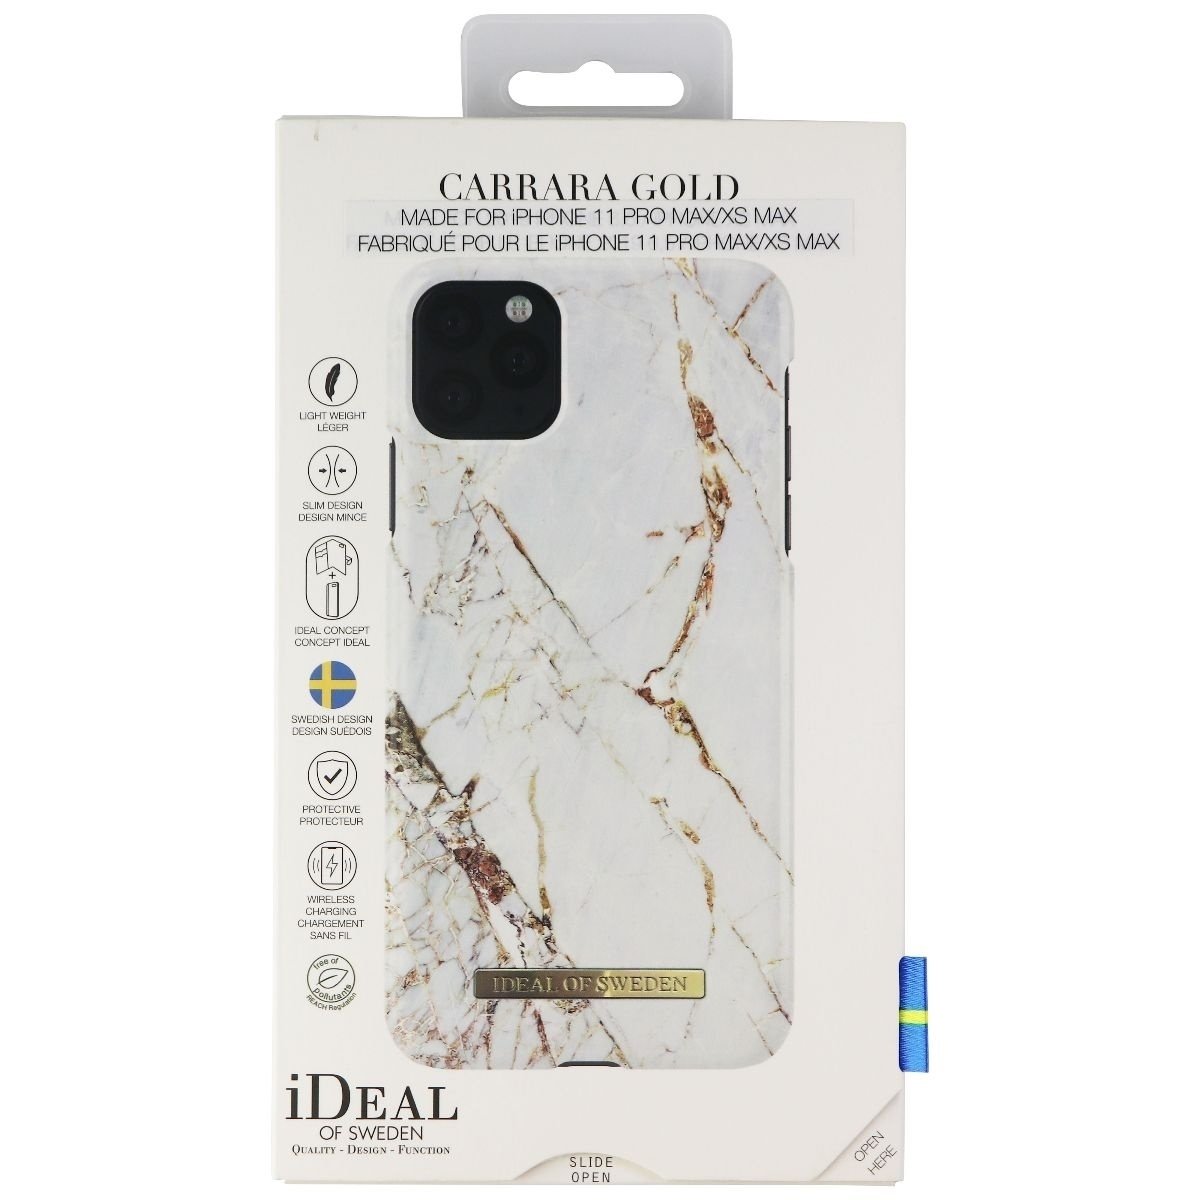 IDeal Of Sweden Case For IPhone 11 Pro Max / XS Max - Carrara Gold